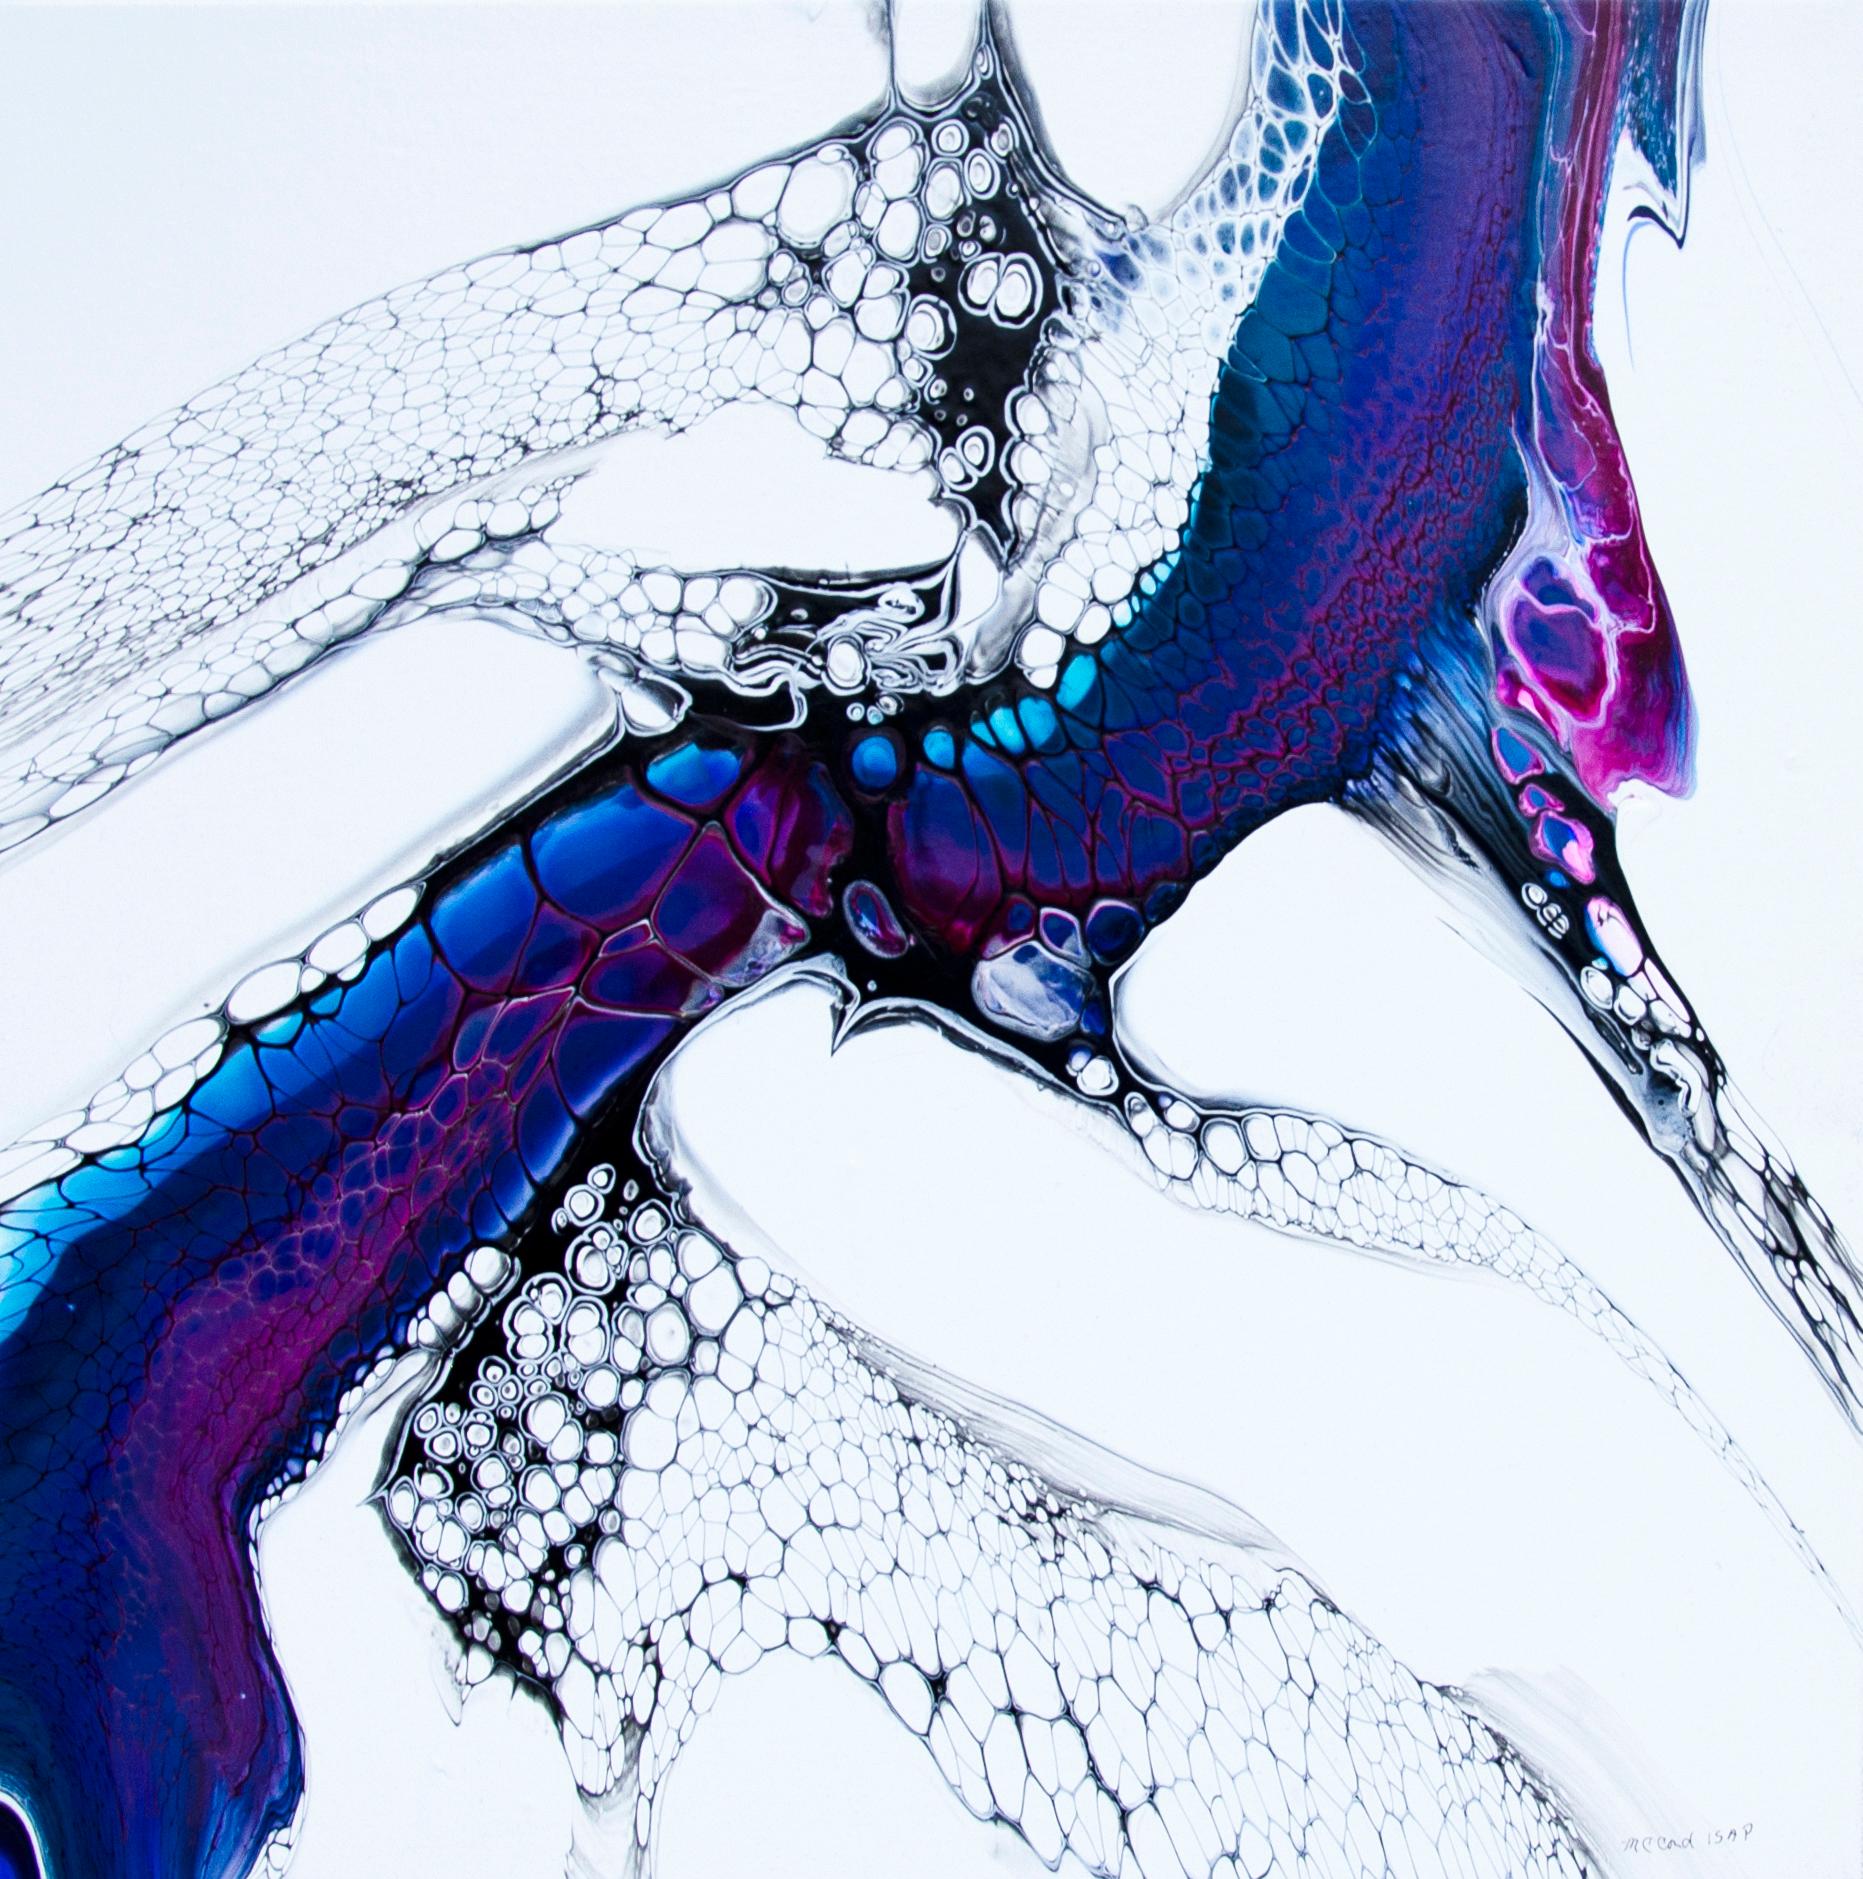 <p>Artist Comments<br>This abstract painting boldly contrasts blue, purple, and black against a stark white background. Made with the acrylic pouring method, the cells created make an illusion of water bubbles and a sense of fluidity in the